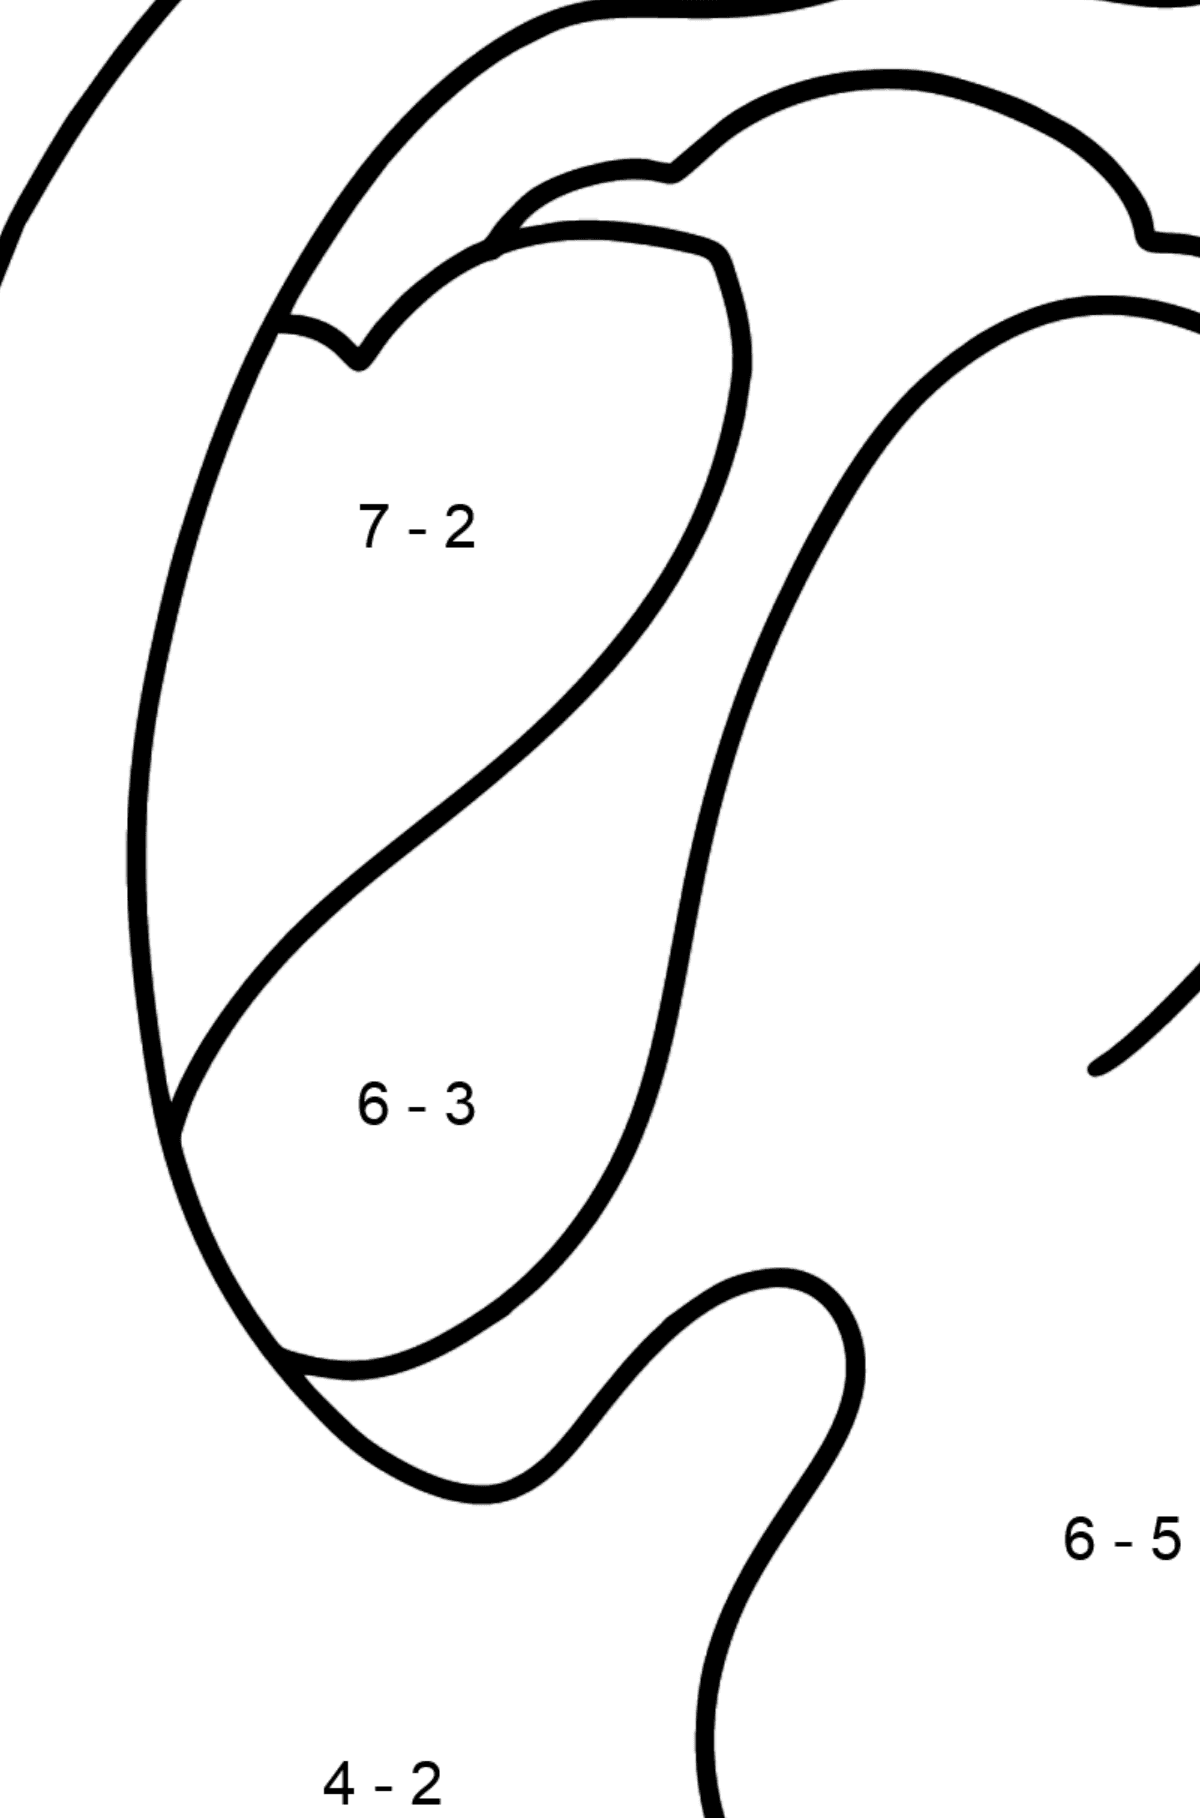 Swan coloring page - Math Coloring - Subtraction for Kids